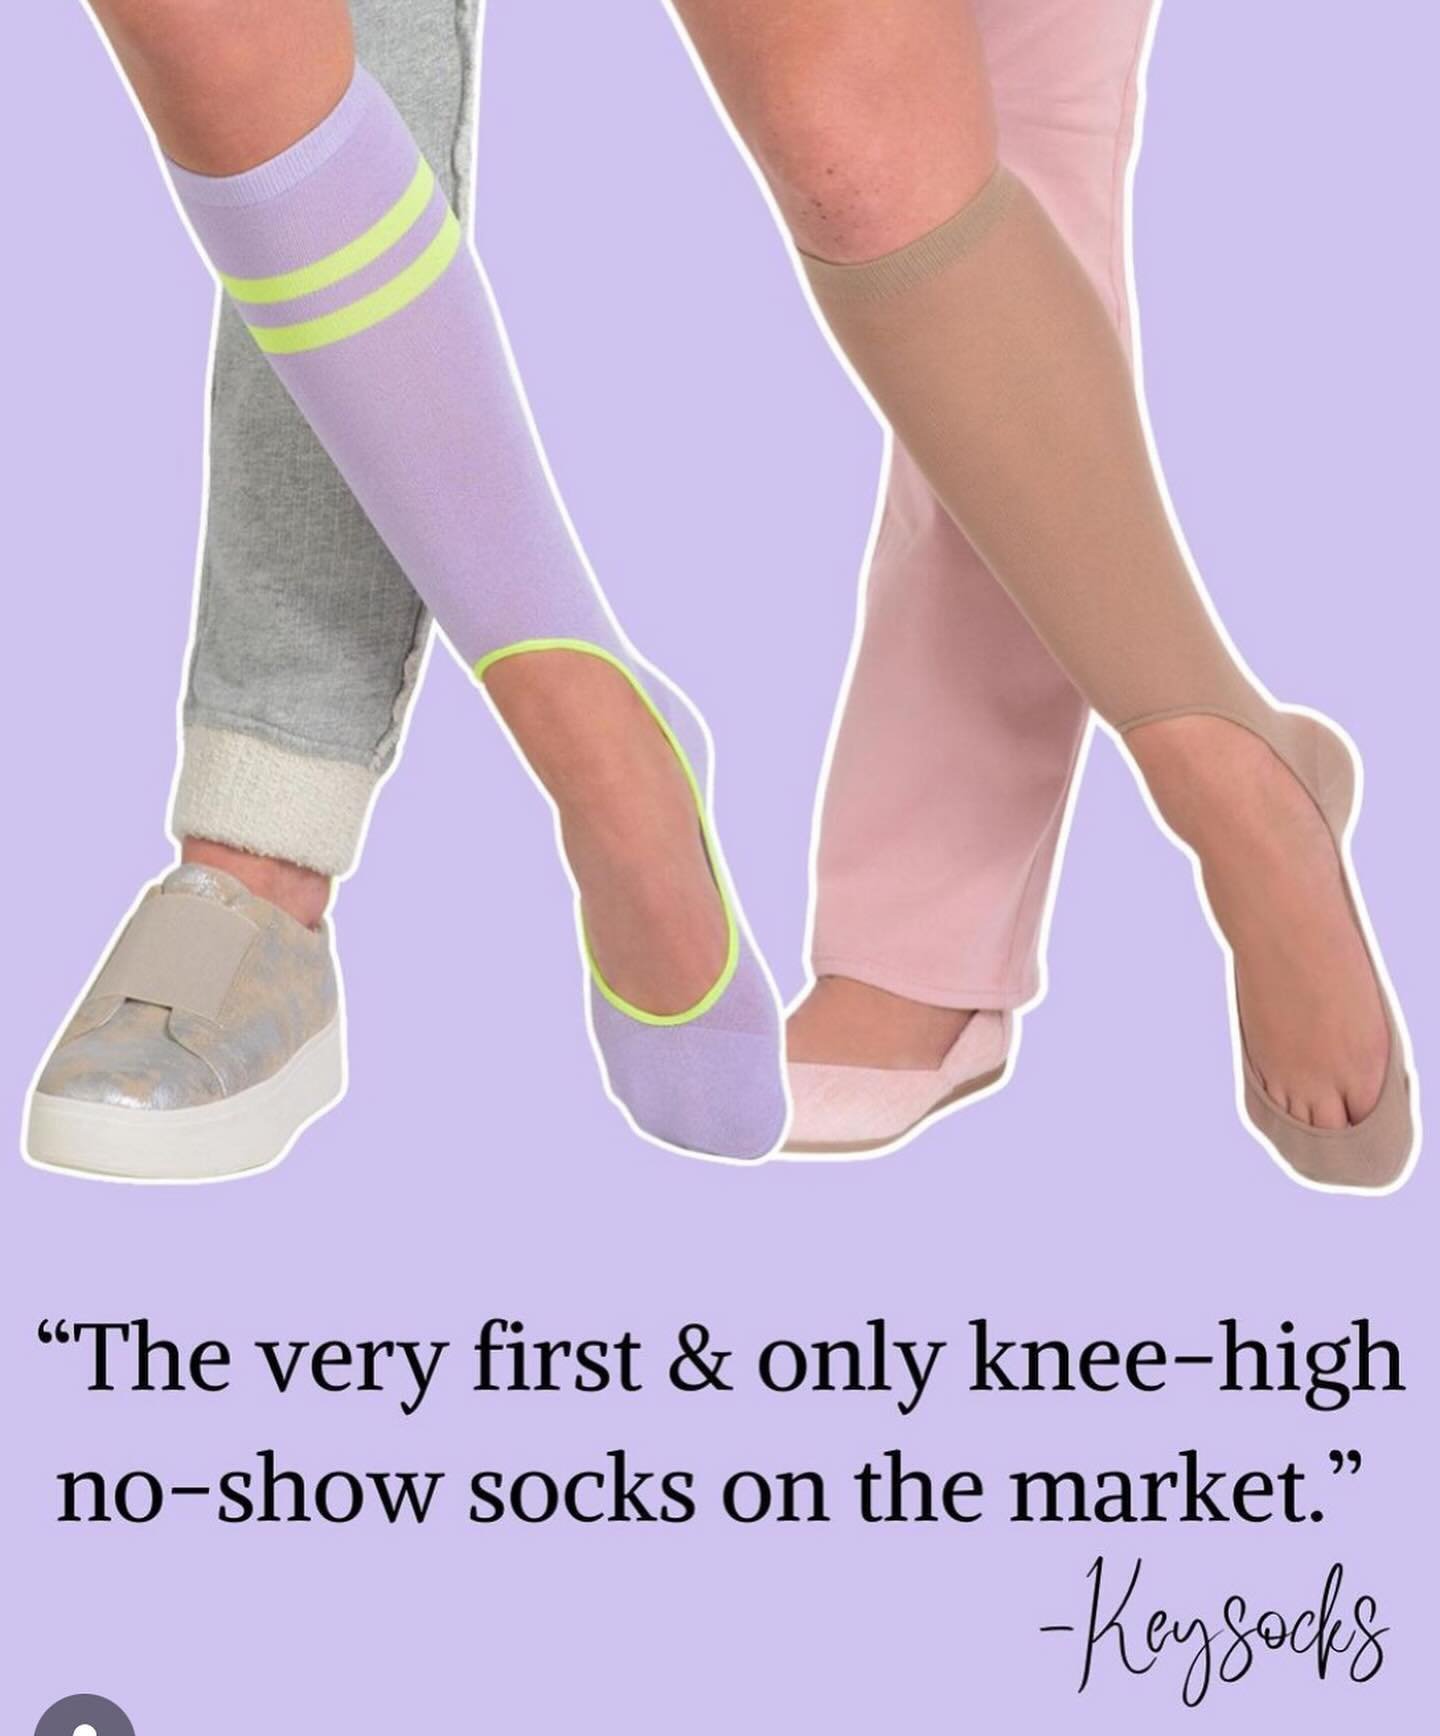 Socks. Socks. Socks. Check out Keysocks + @doublesoul + @vimvigr 💜🗝️🧦 Yes, of course, a necessary addition to your sock drawer! @40boxes 
・・・
No-show, arch support and compression. Discover your sock style with 50% off savings only at 40Boxes.com
